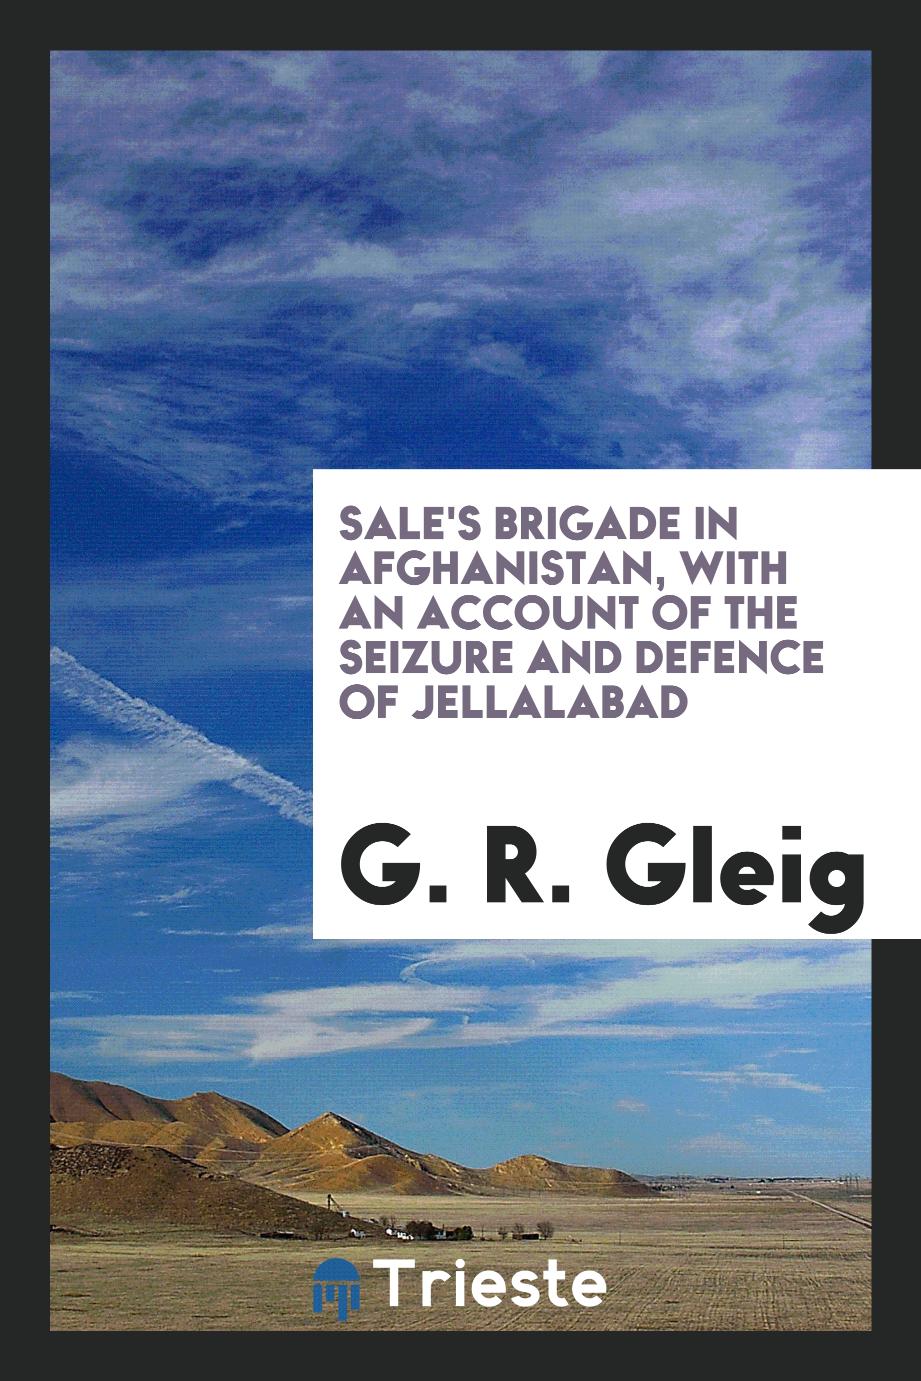 Sale's brigade in Afghanistan, with an account of the seizure and defence of Jellalabad